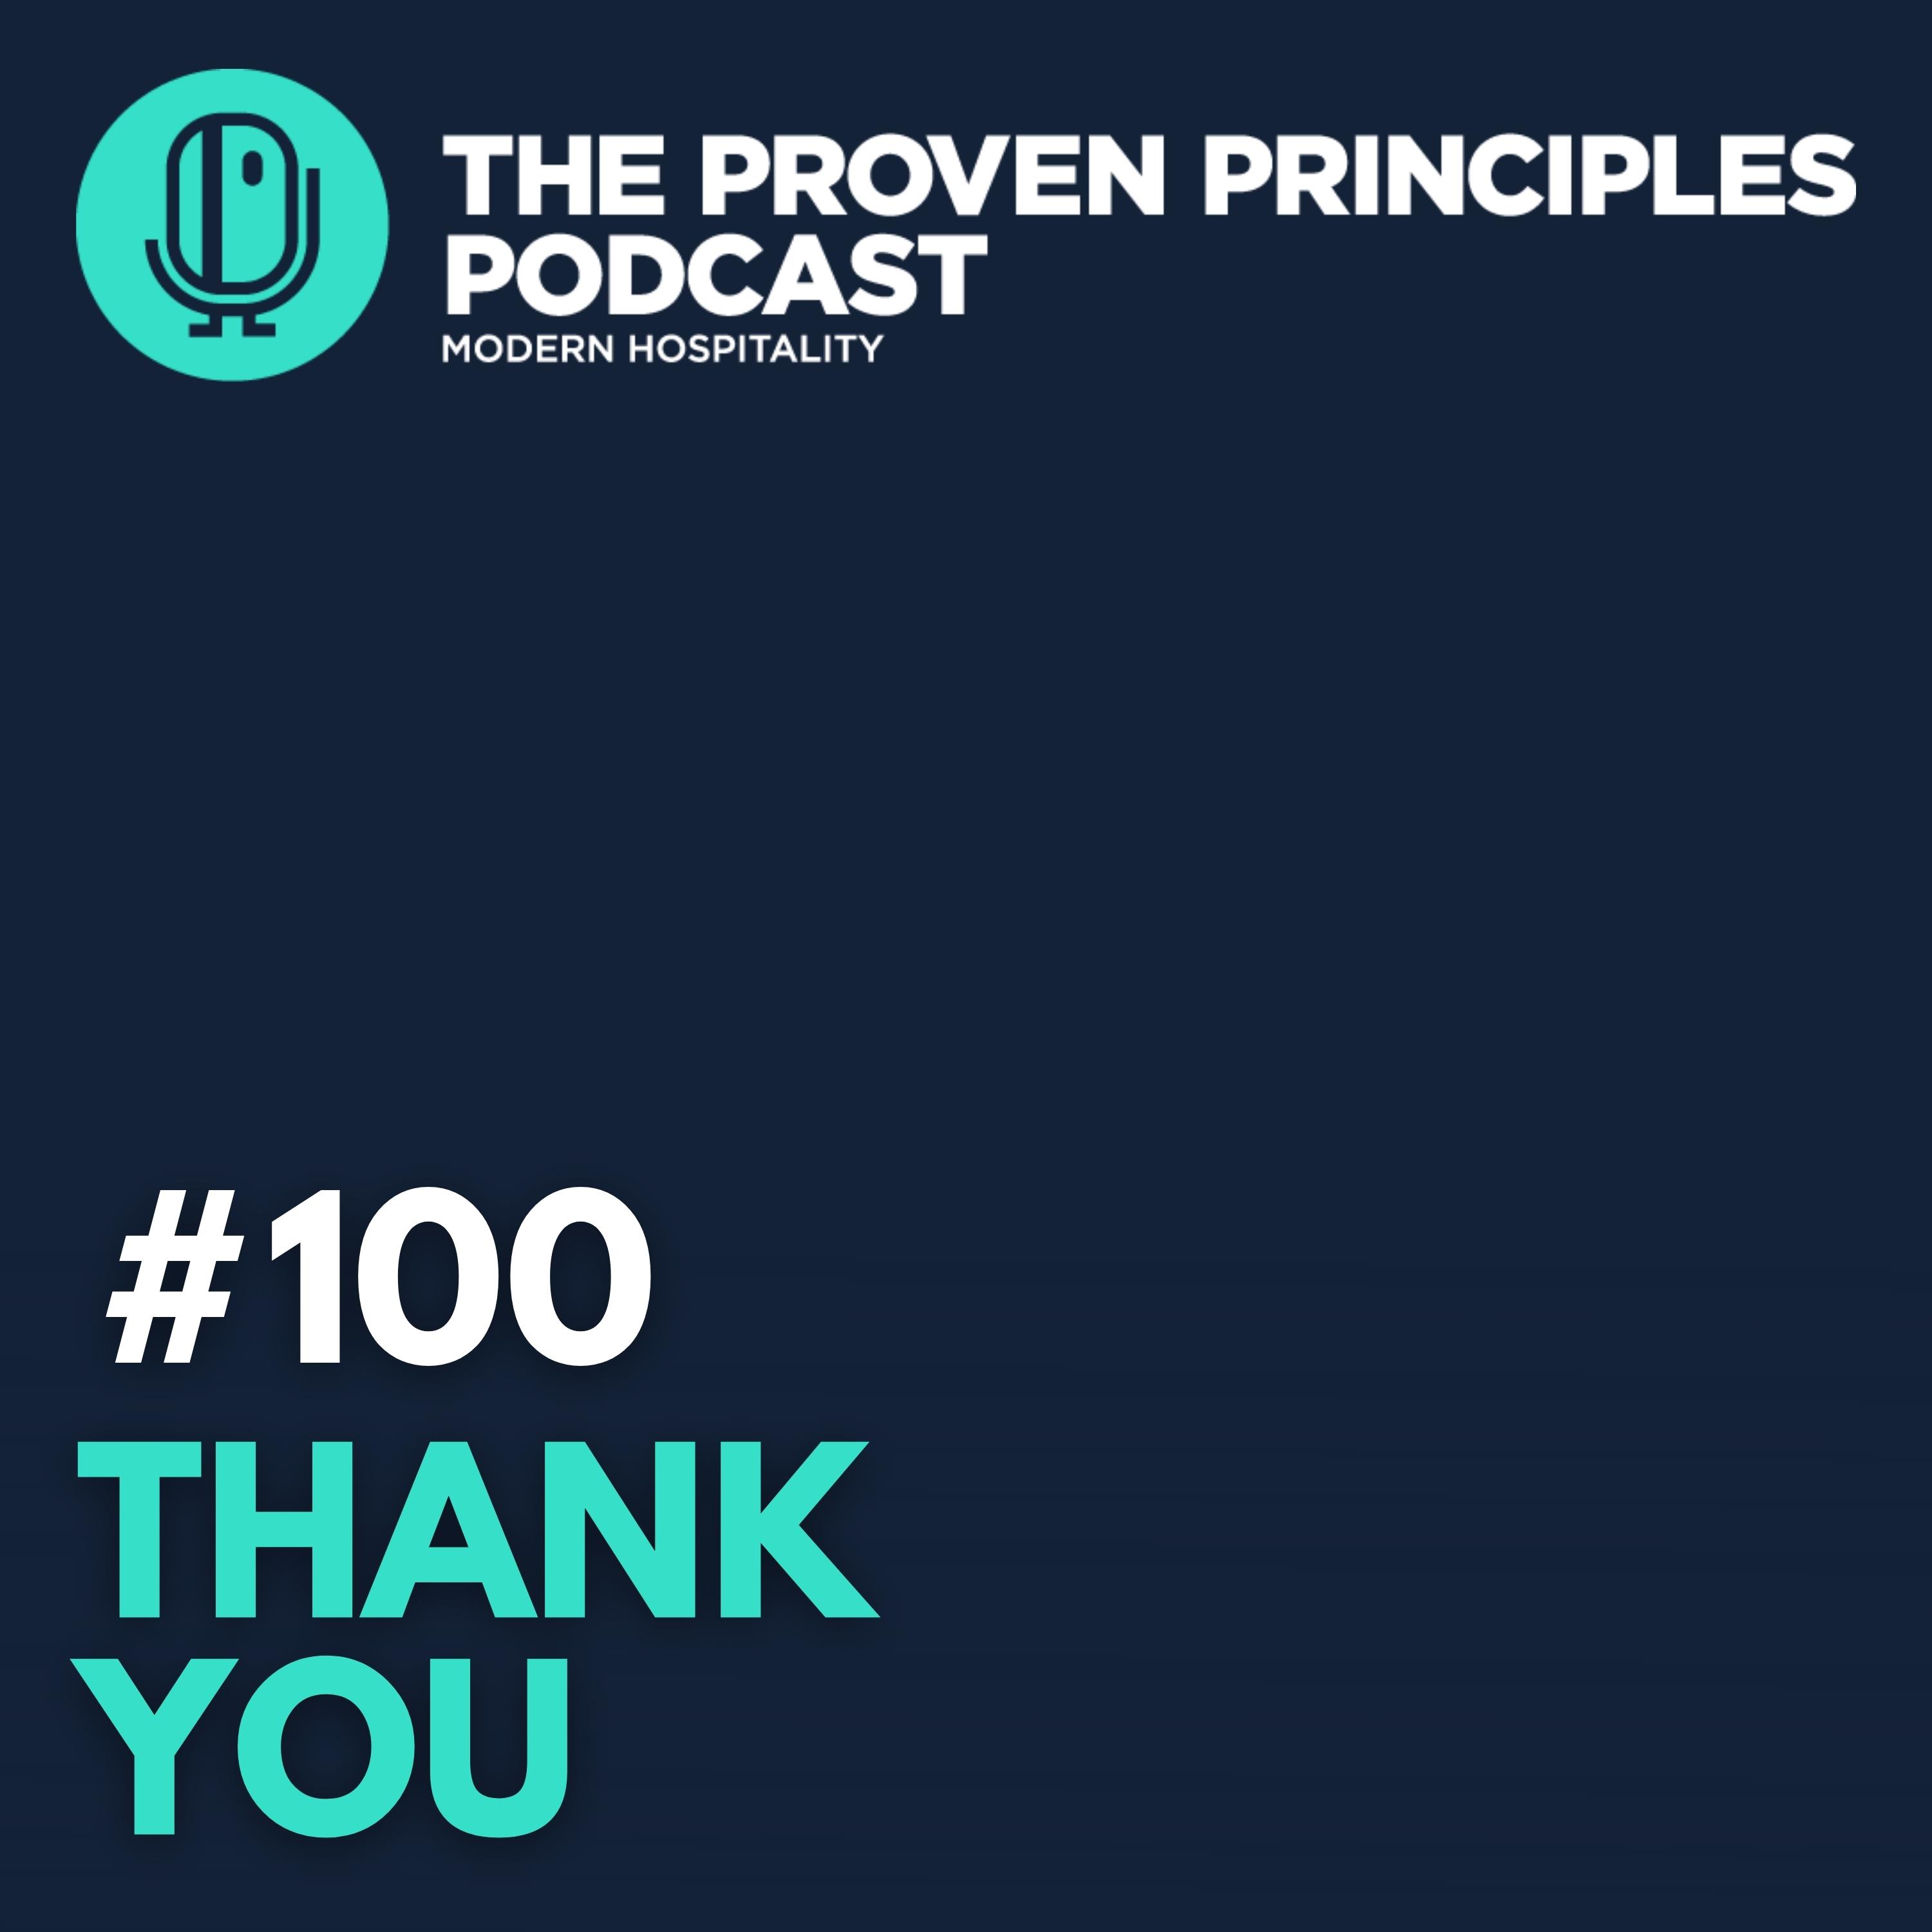 Artwork for podcast The Proven Principles Hospitality Podcast